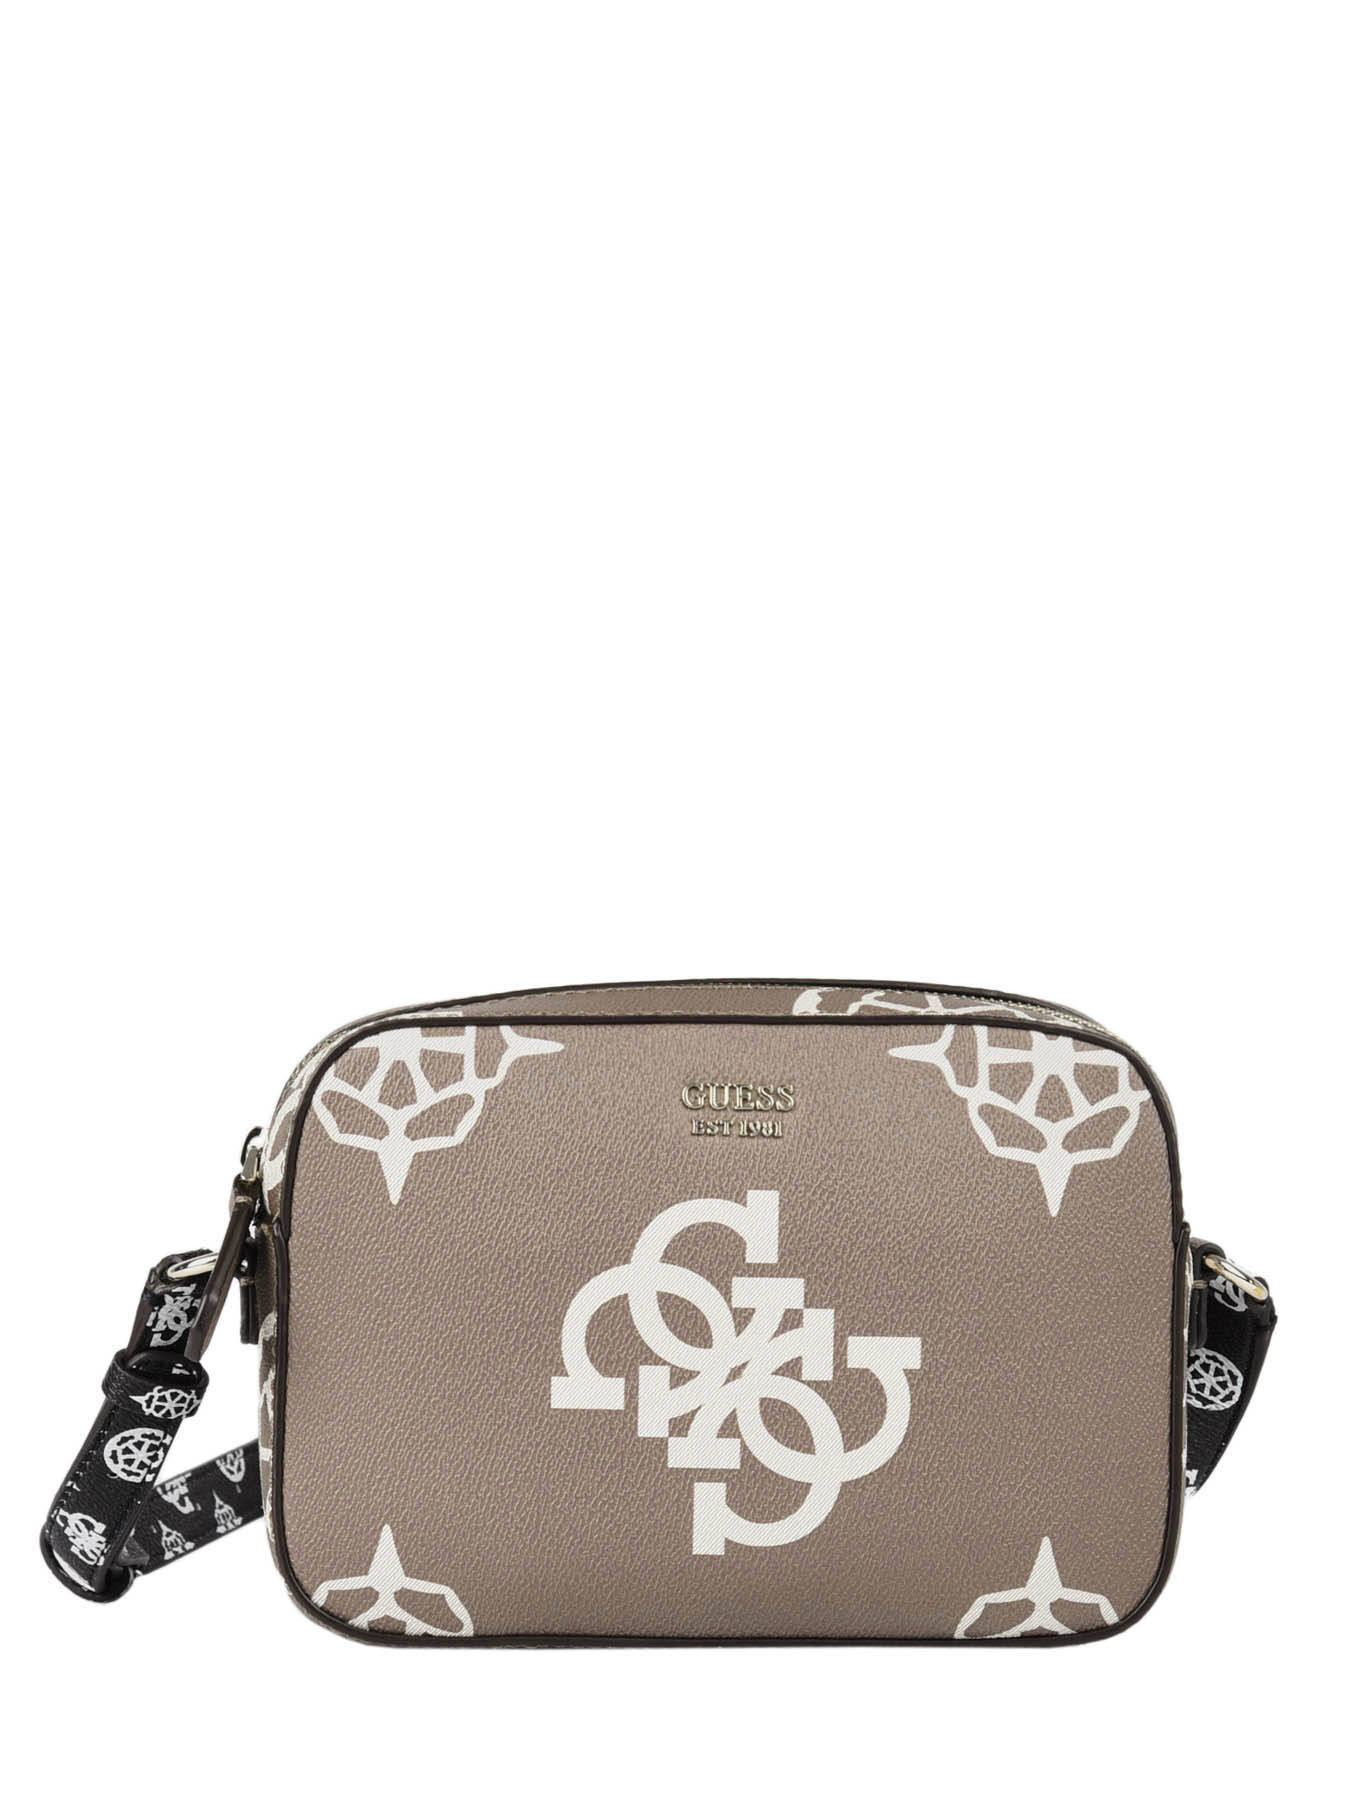 Guess Crossbody bag HWSO.6691120 - best prices